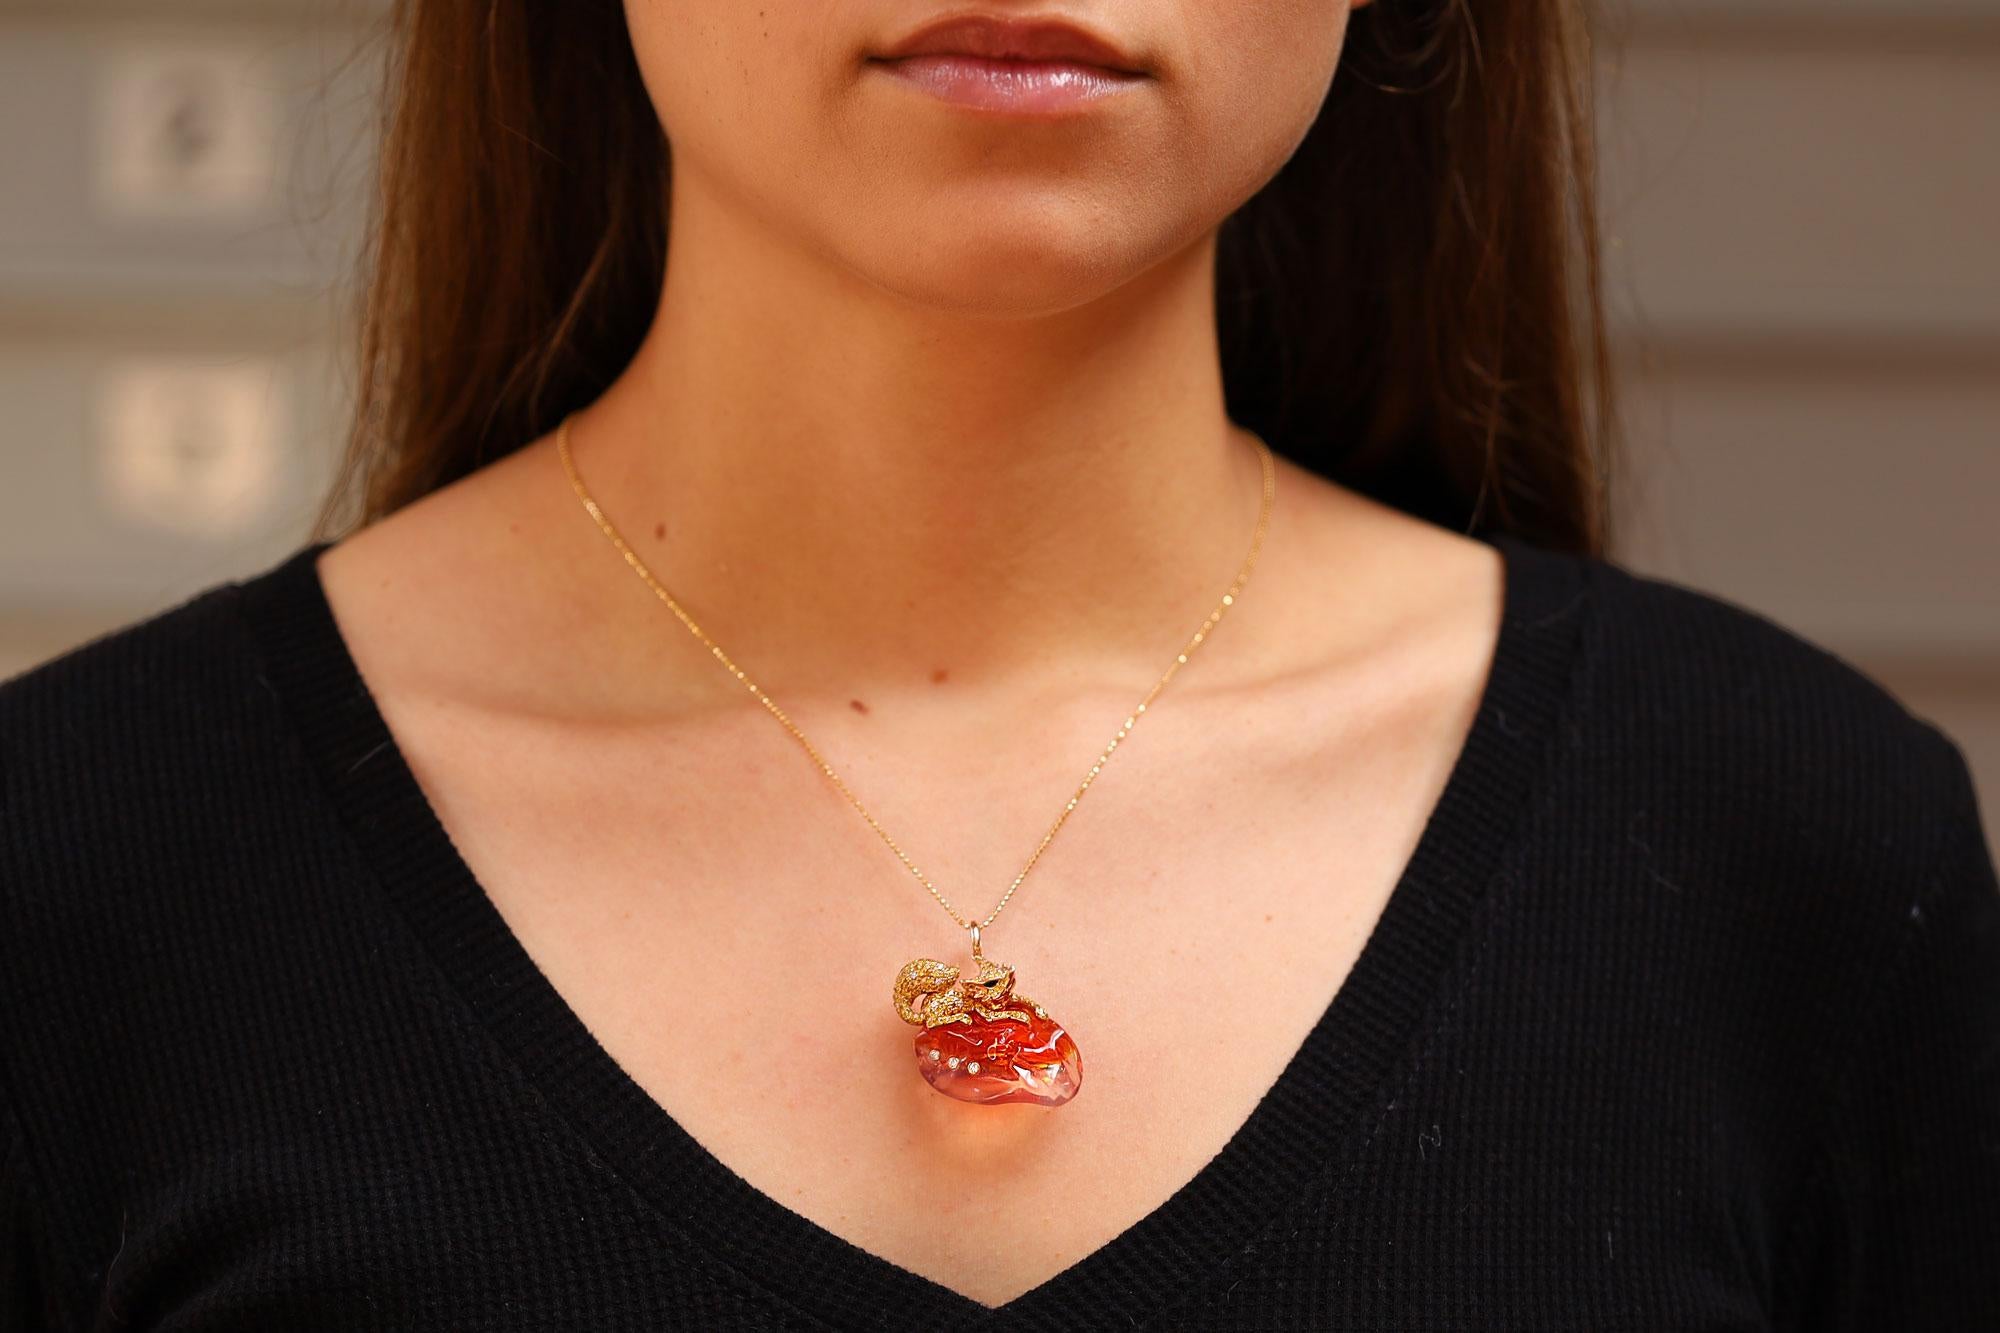 Bask the in the unique beauty of this vintage vulpine pendant necklace. Expertly crafted in 18k rose gold with a free form Mexican fire opal weighing an impressive 19.95 carats. Truly one-of-a-kind, this conversation piece goes to the next level